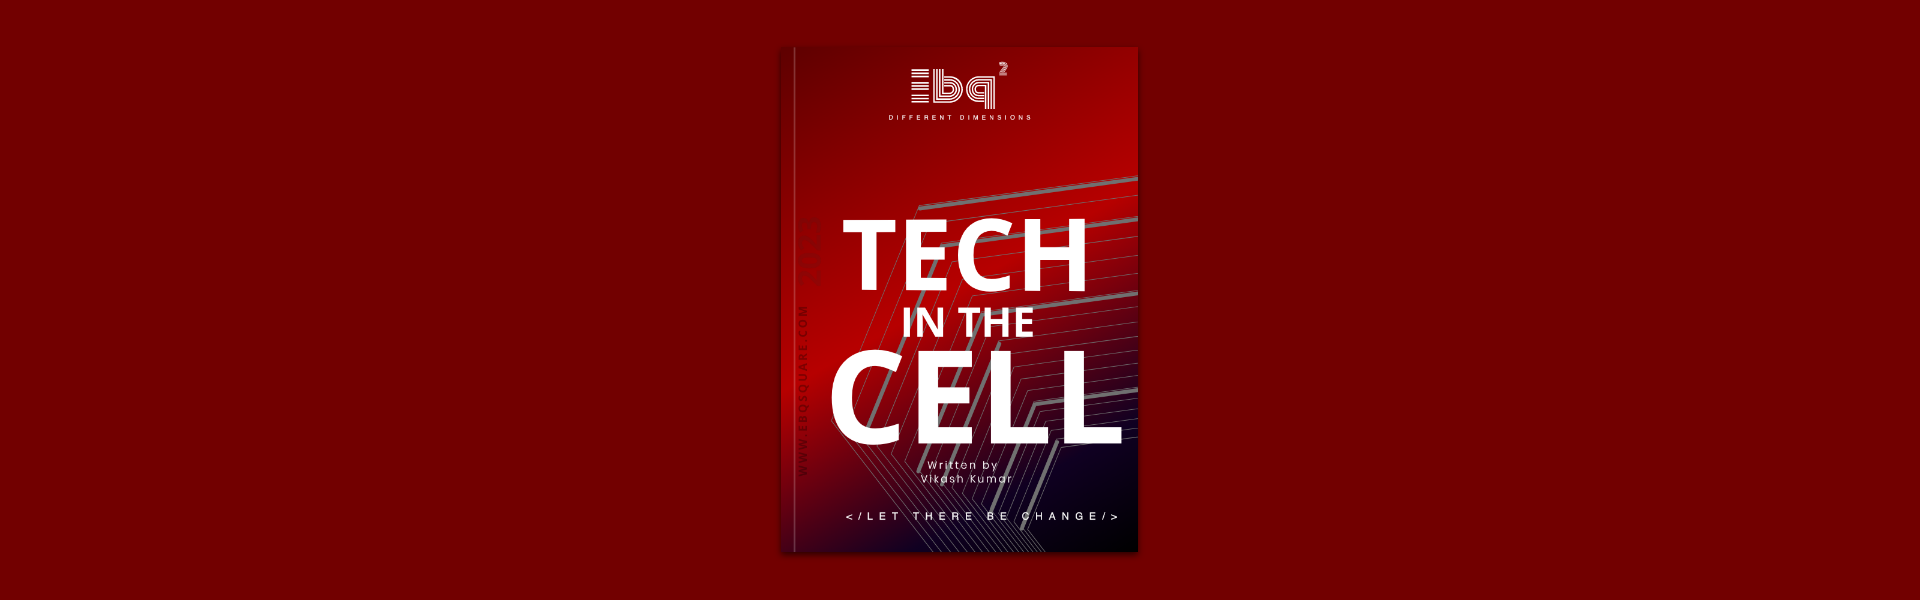 Tech in the cell